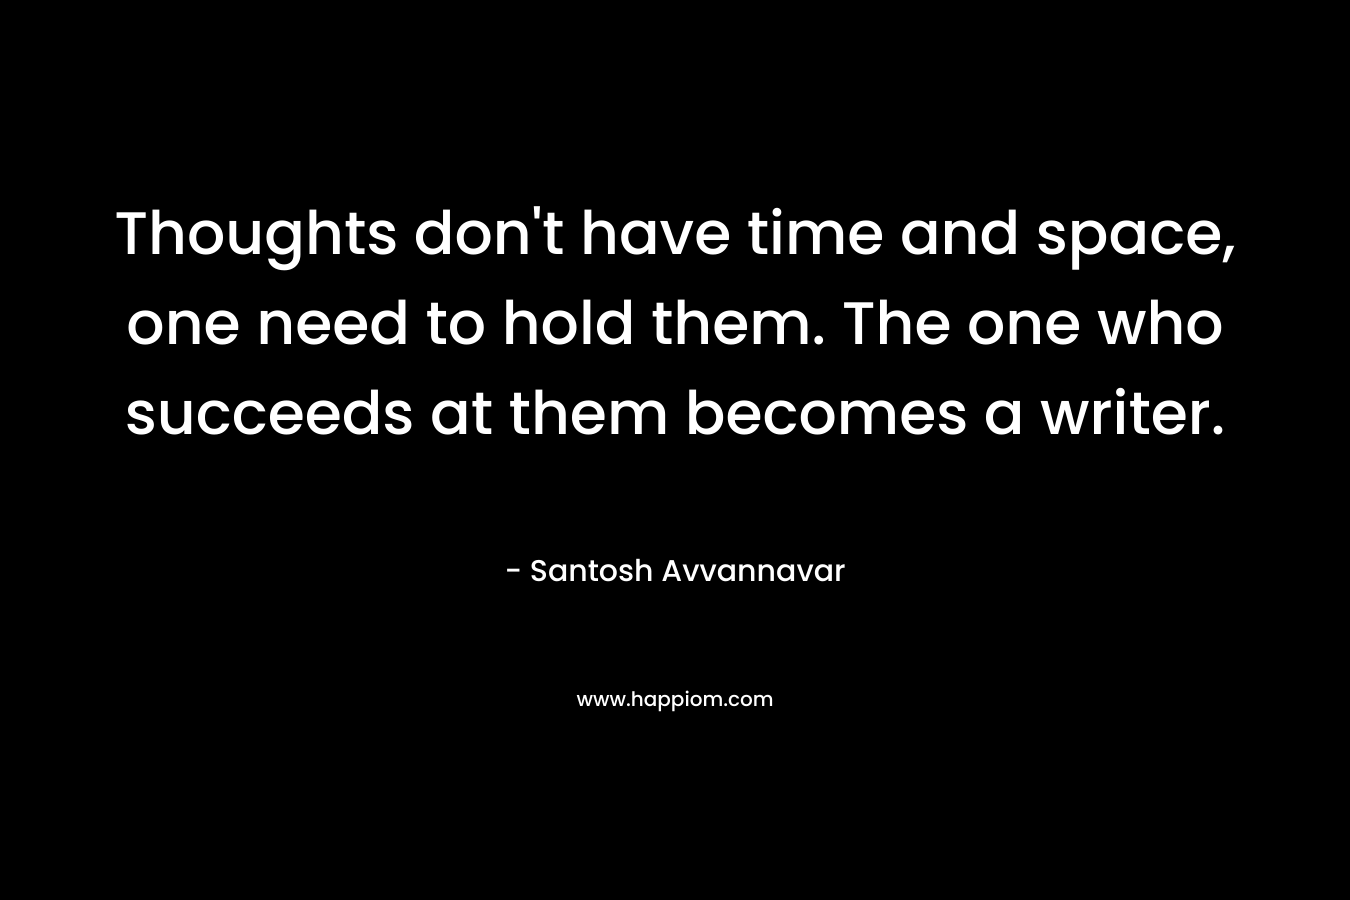 Thoughts don't have time and space, one need to hold them. The one who succeeds at them becomes a writer.